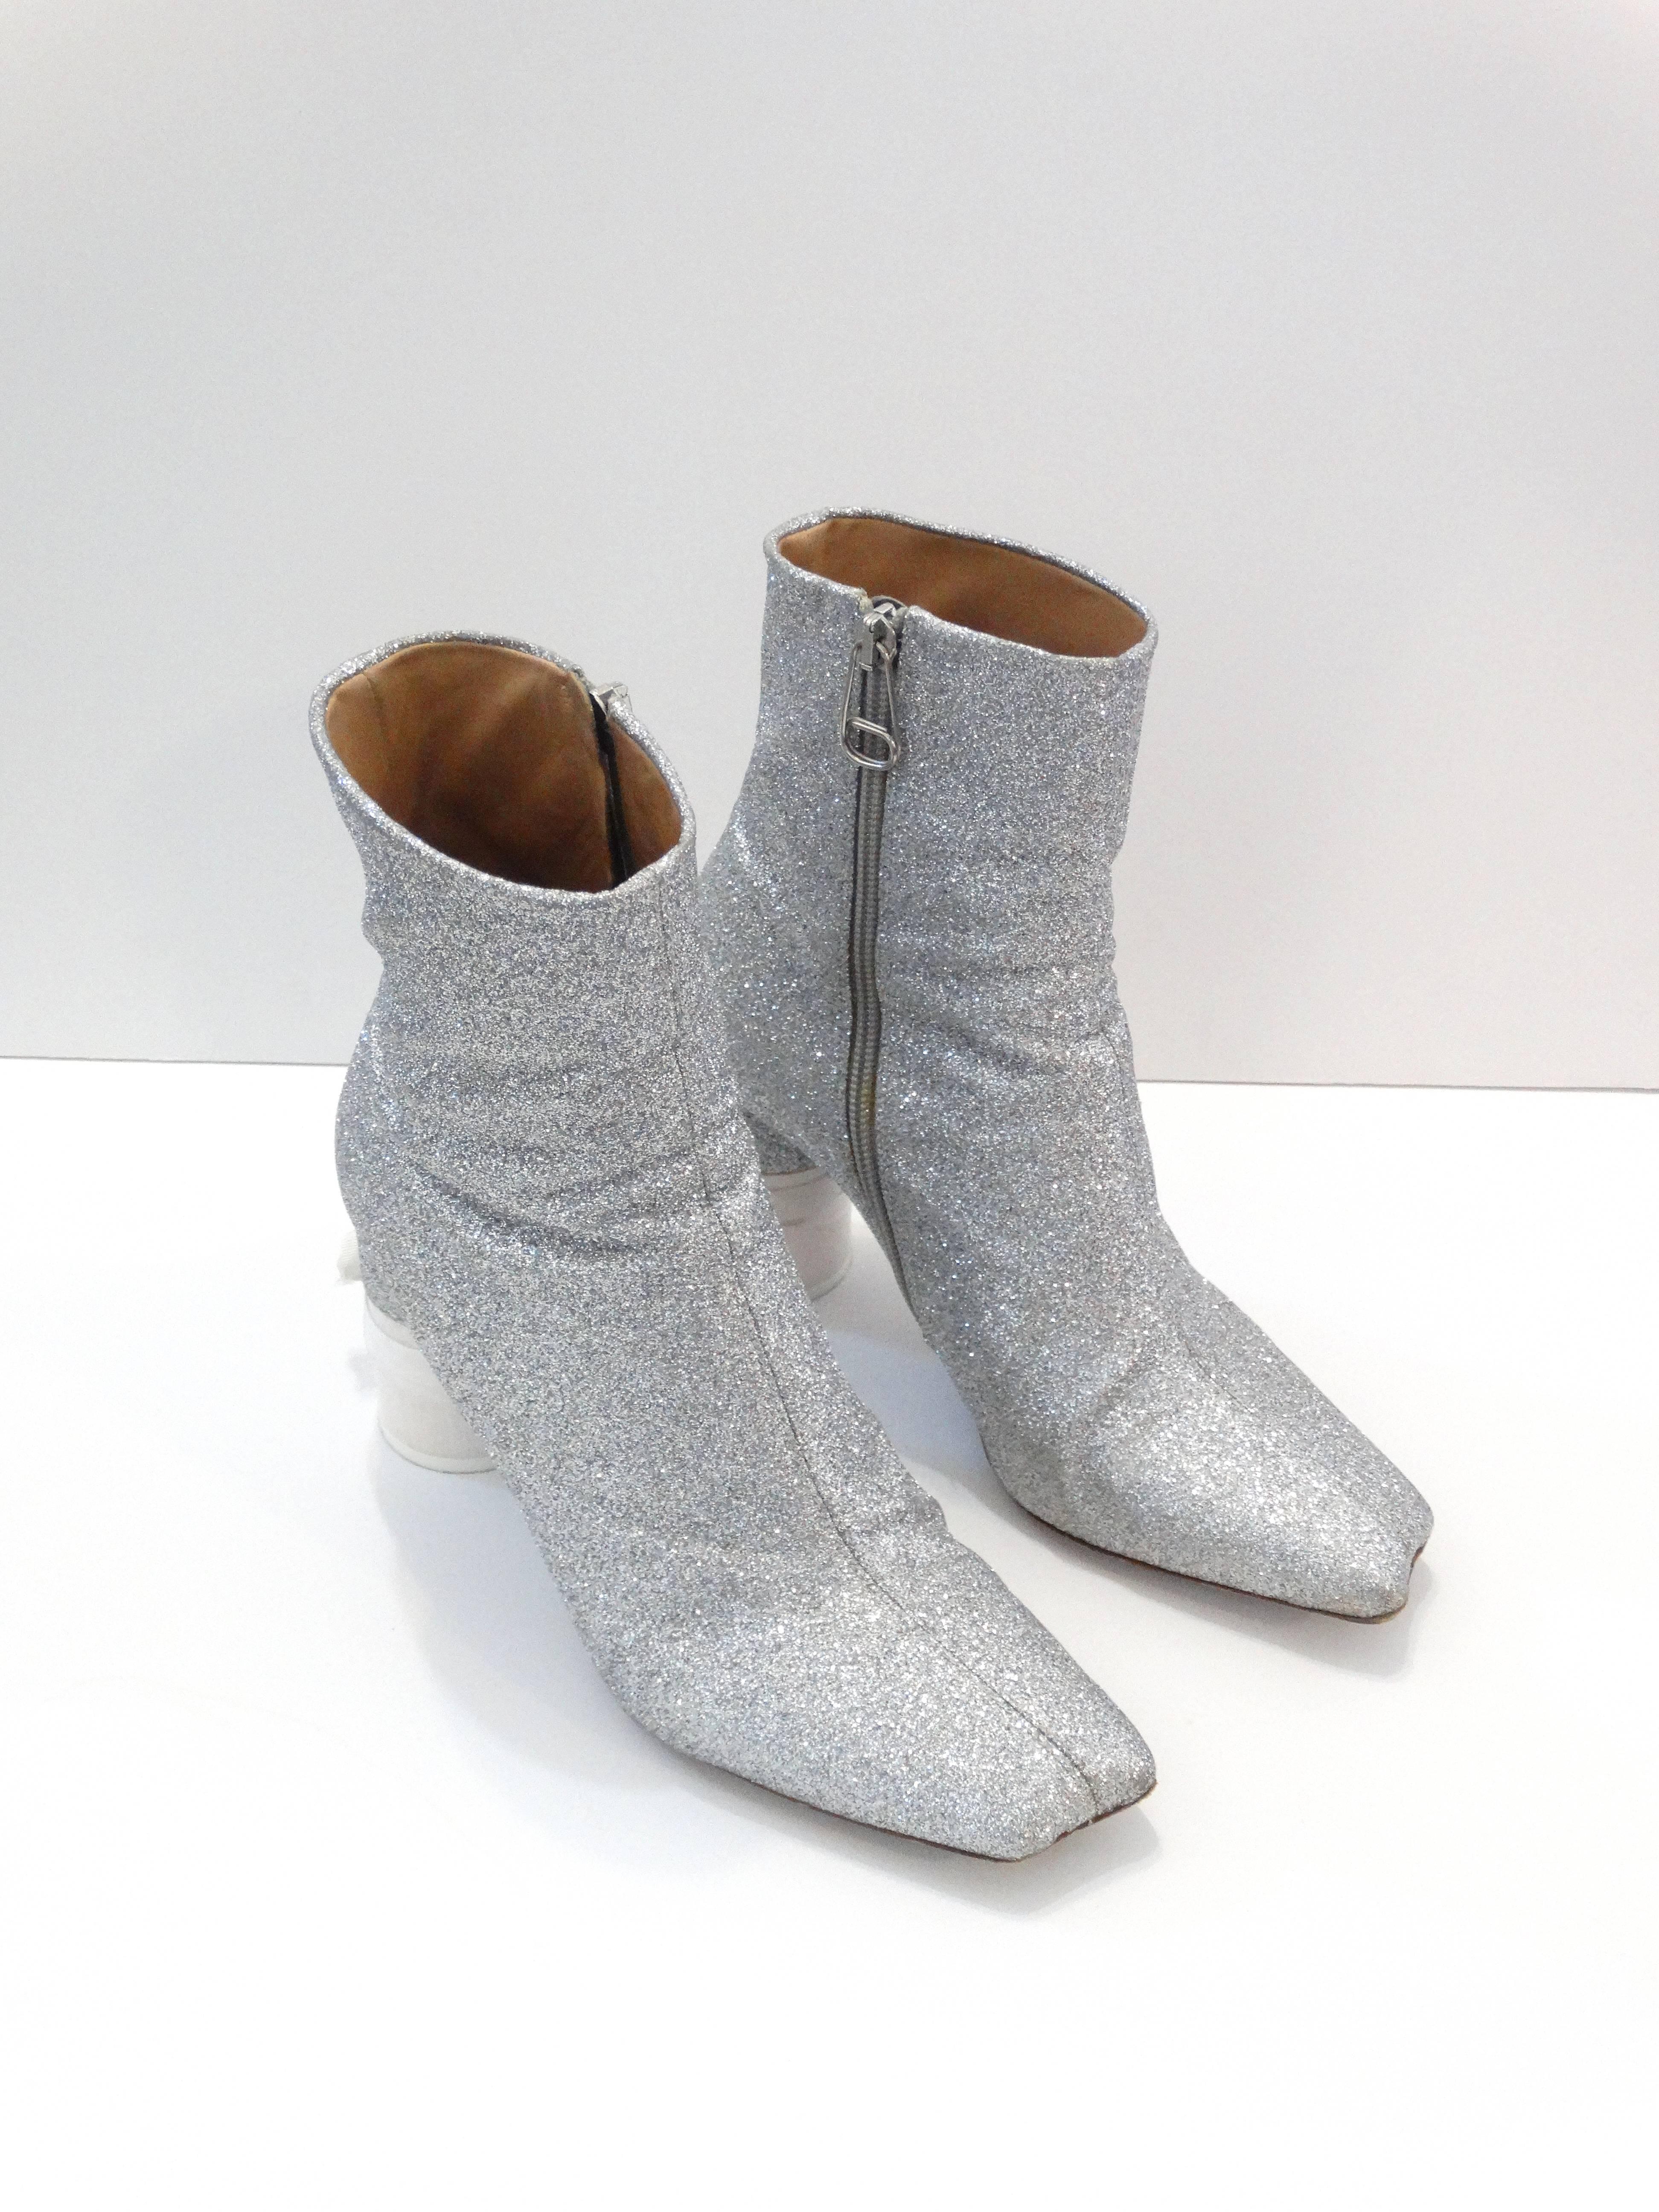 A fabulous pair Martin Margiela silver glitter ribbon heeled booties. Marked size 38.5 fits a todays size 8. Comes with a brand new package of ribbon for the heels. In original box 